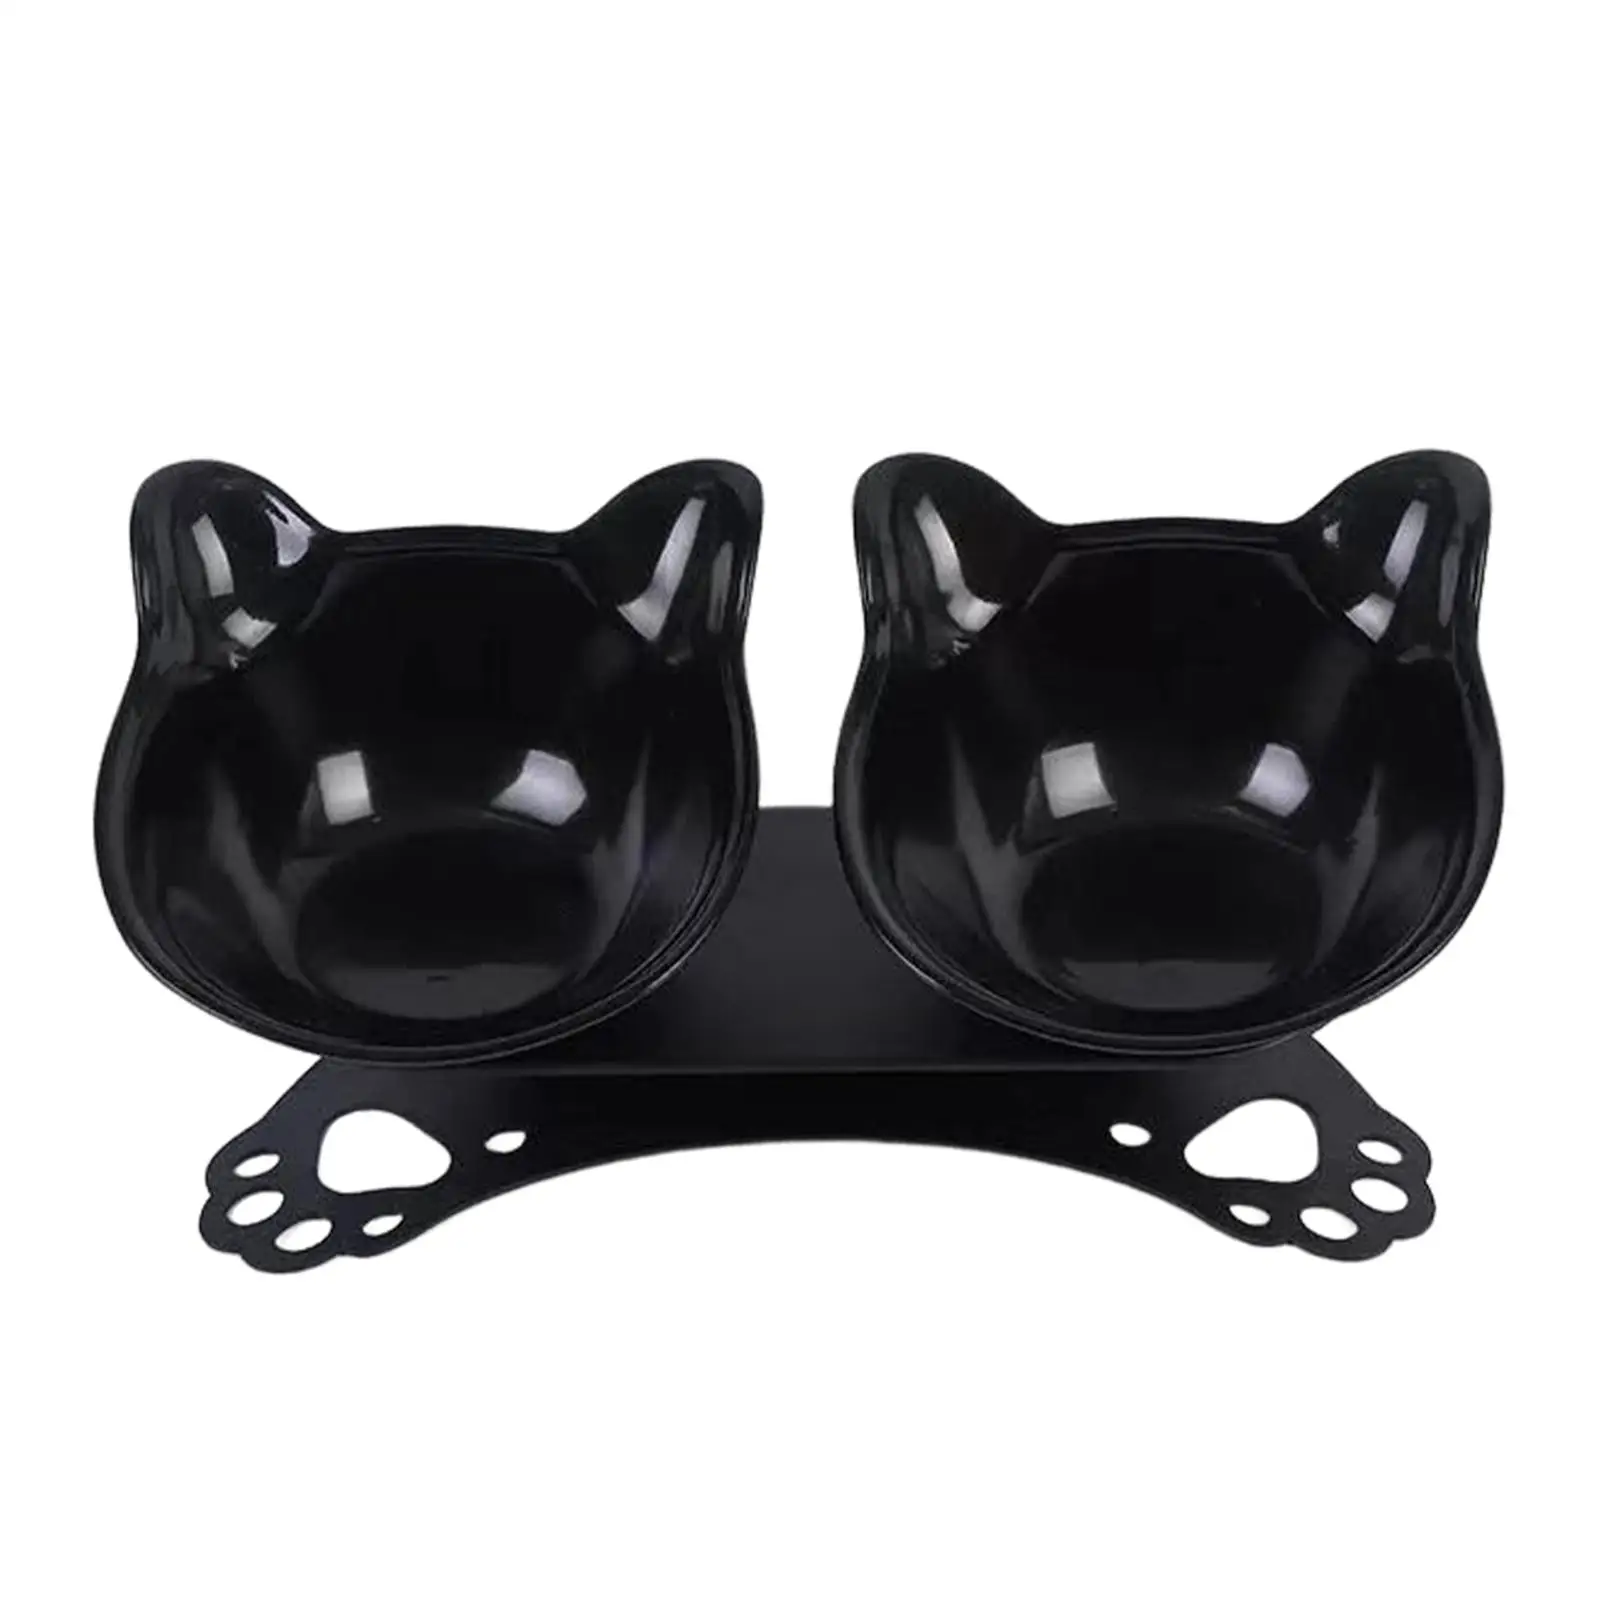 Cat Elevated Double Bowls Raised Pet Feeder Removable Durable Feeding Dishes Drink Bowl 15 Tilted for Indoor Small Dogs Puppy